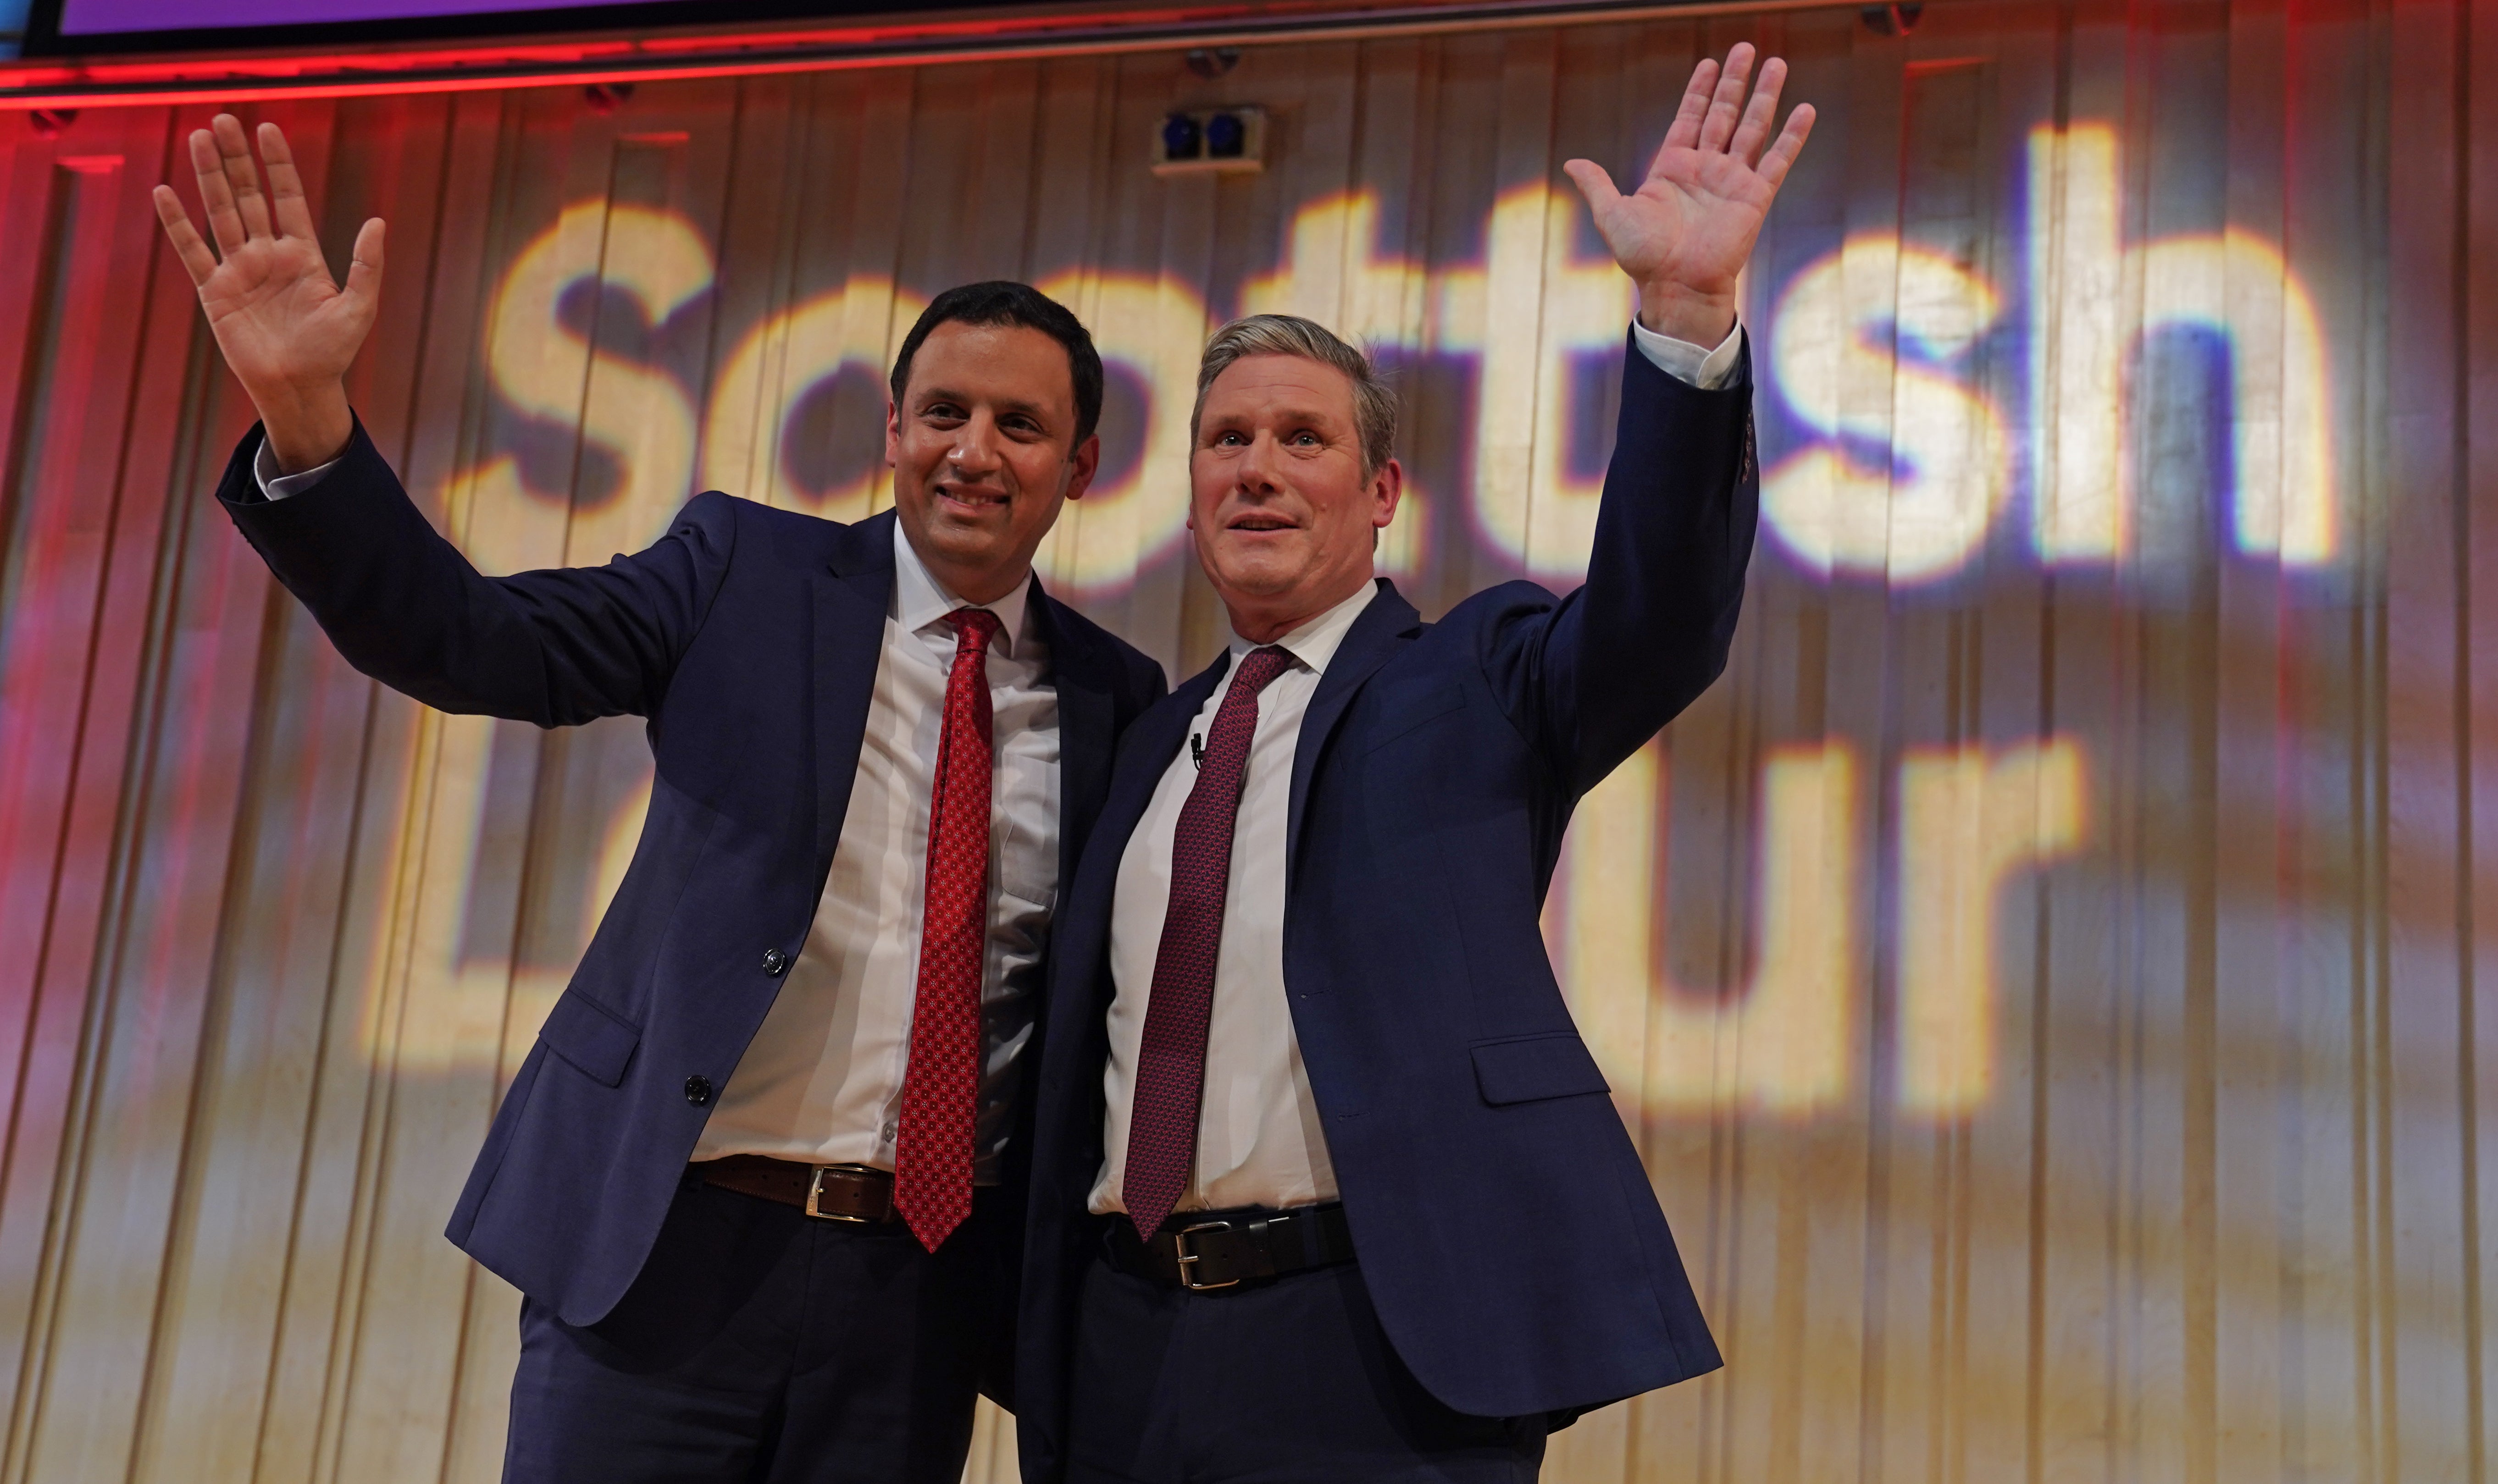 Sir Keir Starmer spoke at the Scottish Labour conference in Glasgow (Andrew Milligan/PA)